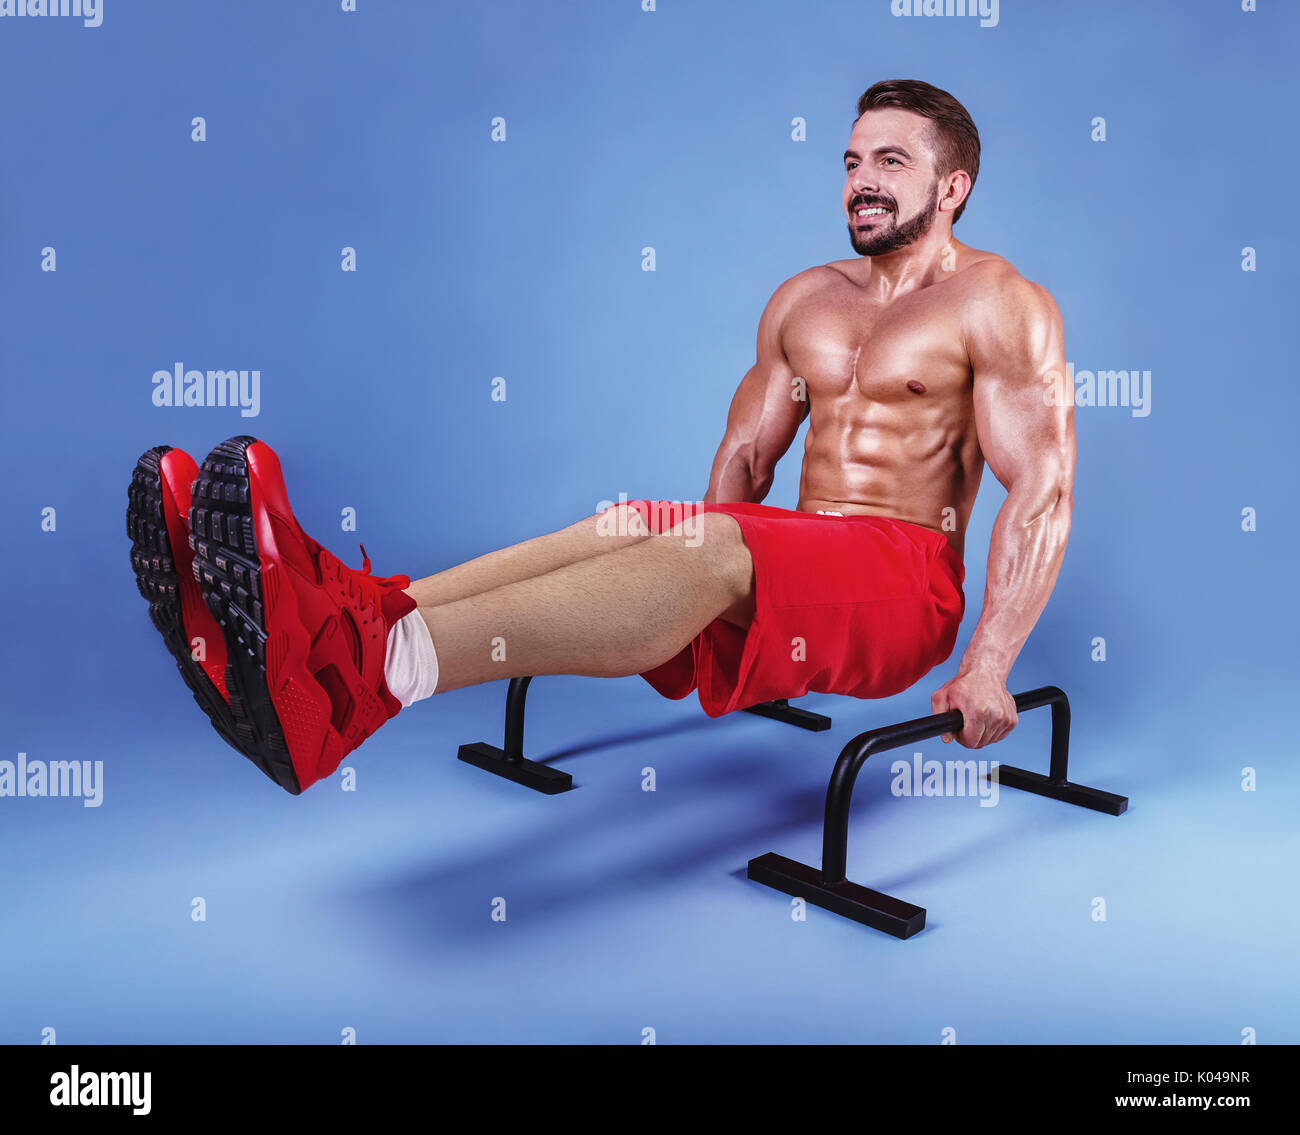 Handsome athlete working out exercise on parallel bars on a blue background. Studio shot Stock Photo